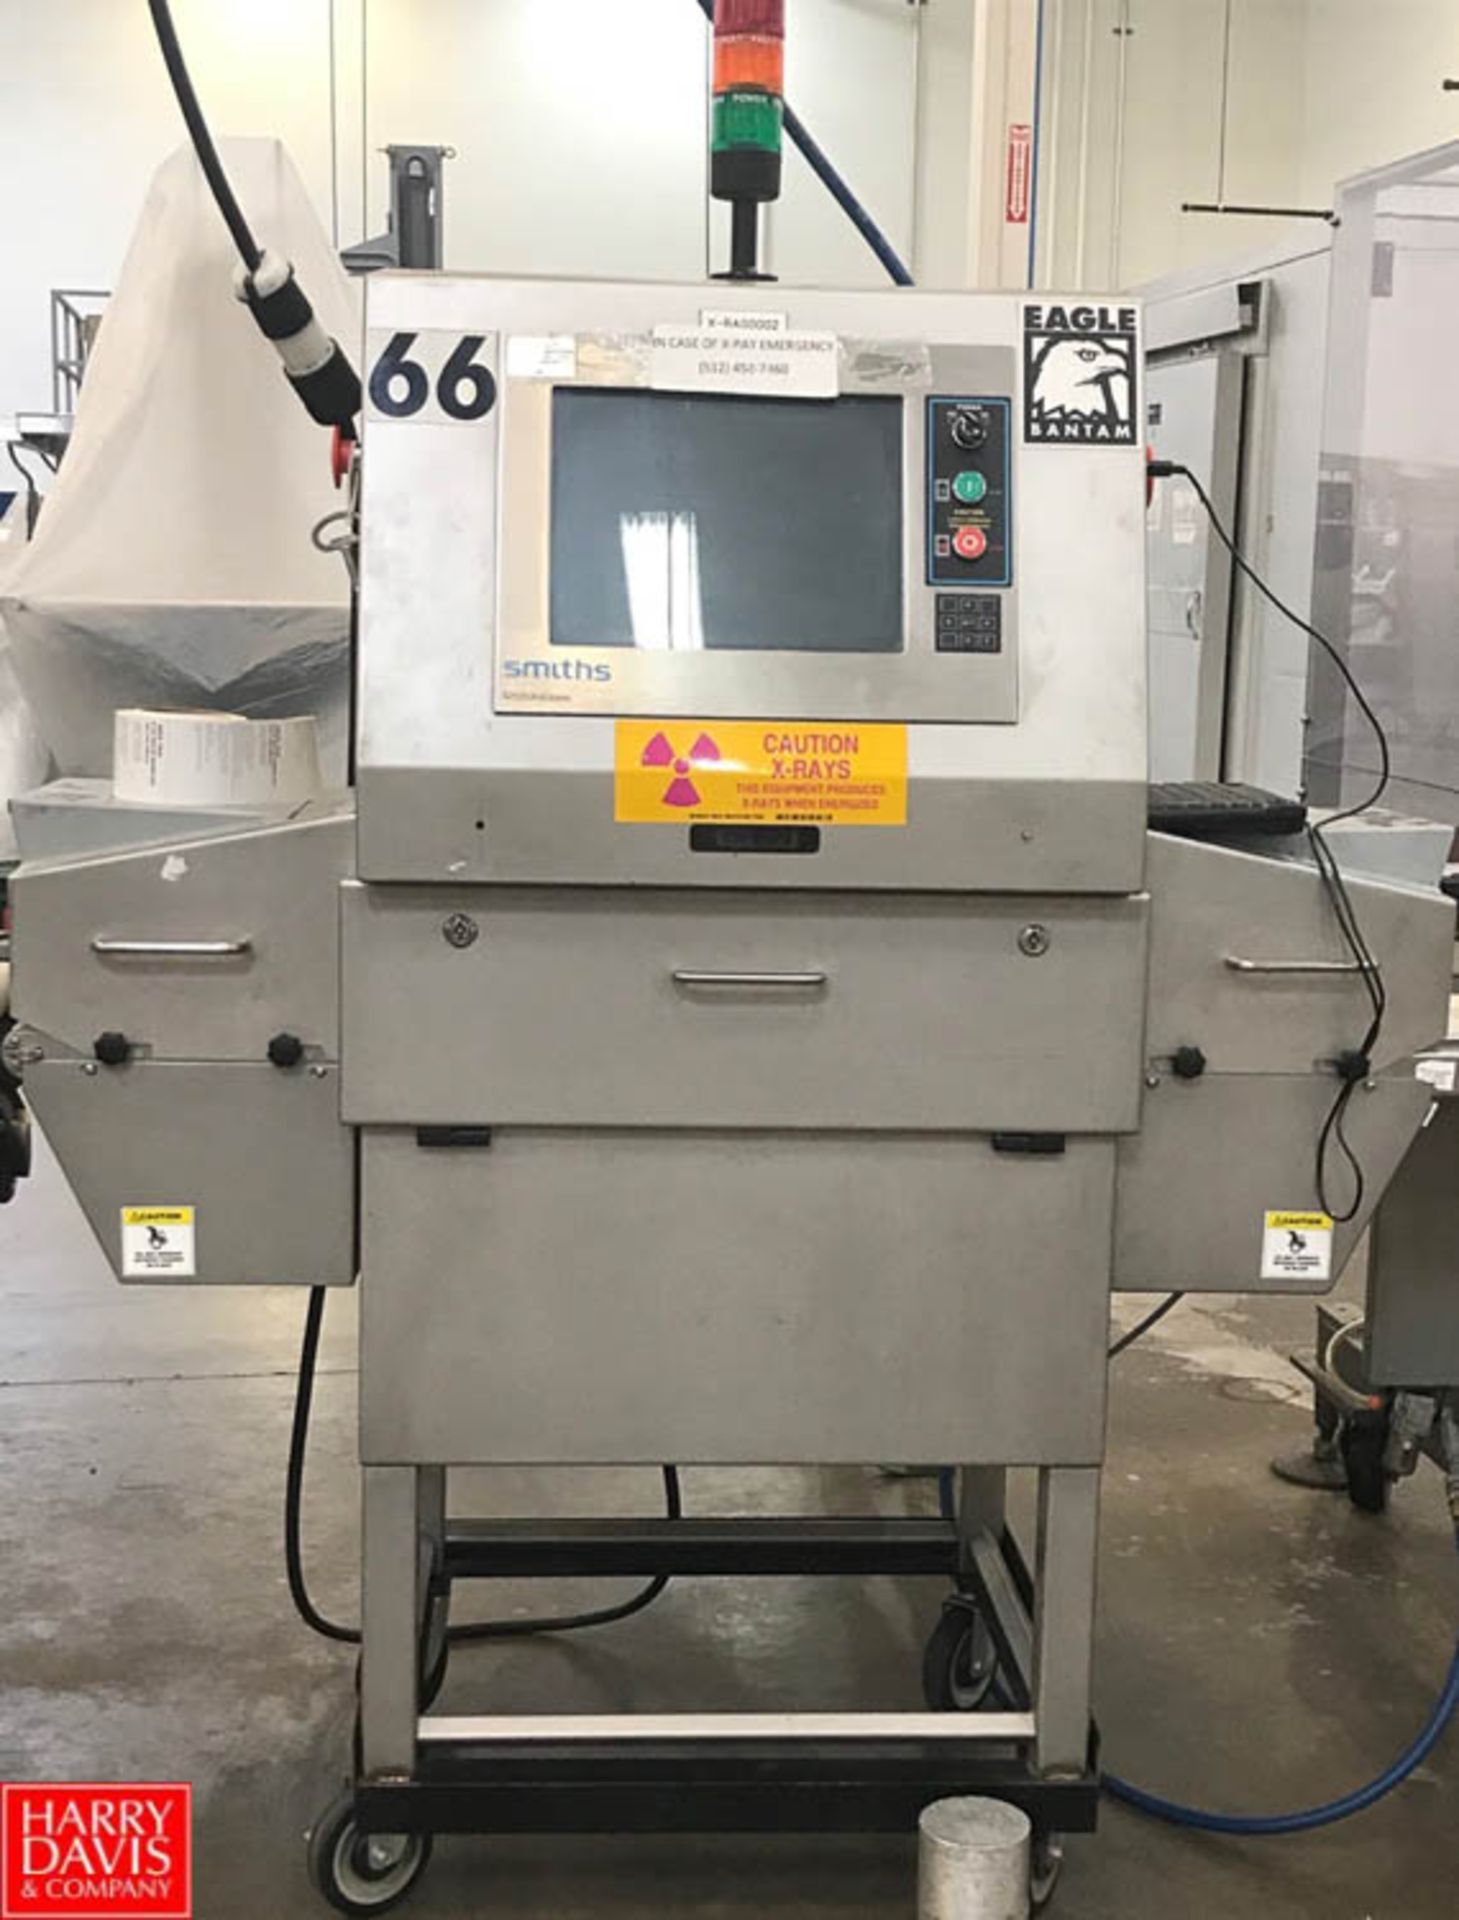 Eagle Combo X-Ray Inspection Machine : SN 100486 Rigging Fee: $200